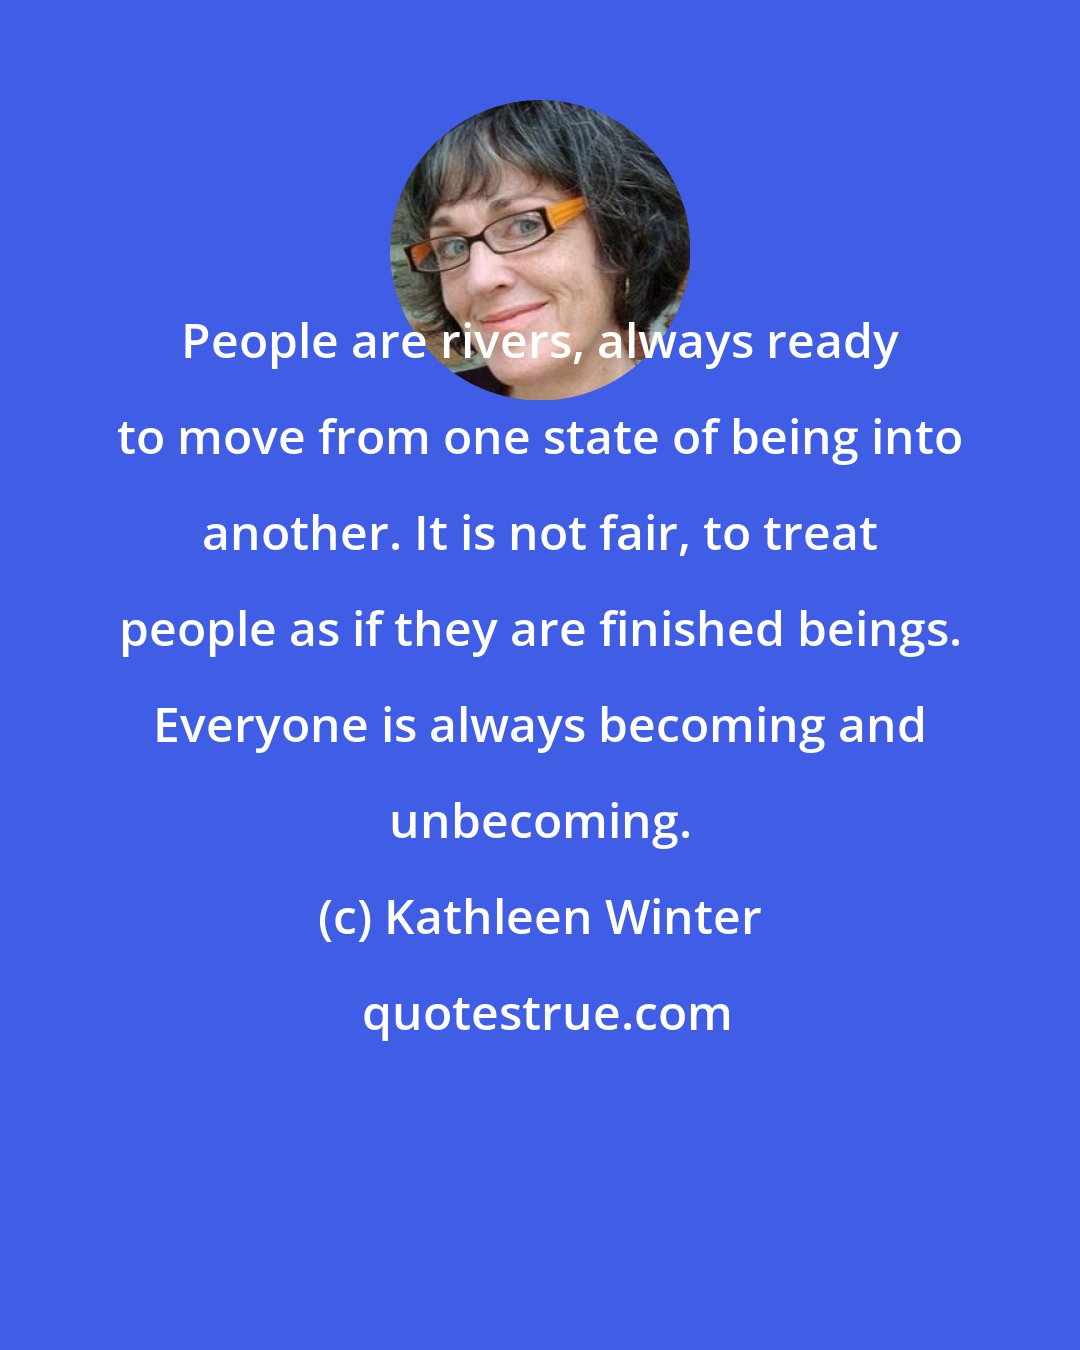 Kathleen Winter: People are rivers, always ready to move from one state of being into another. It is not fair, to treat people as if they are finished beings. Everyone is always becoming and unbecoming.